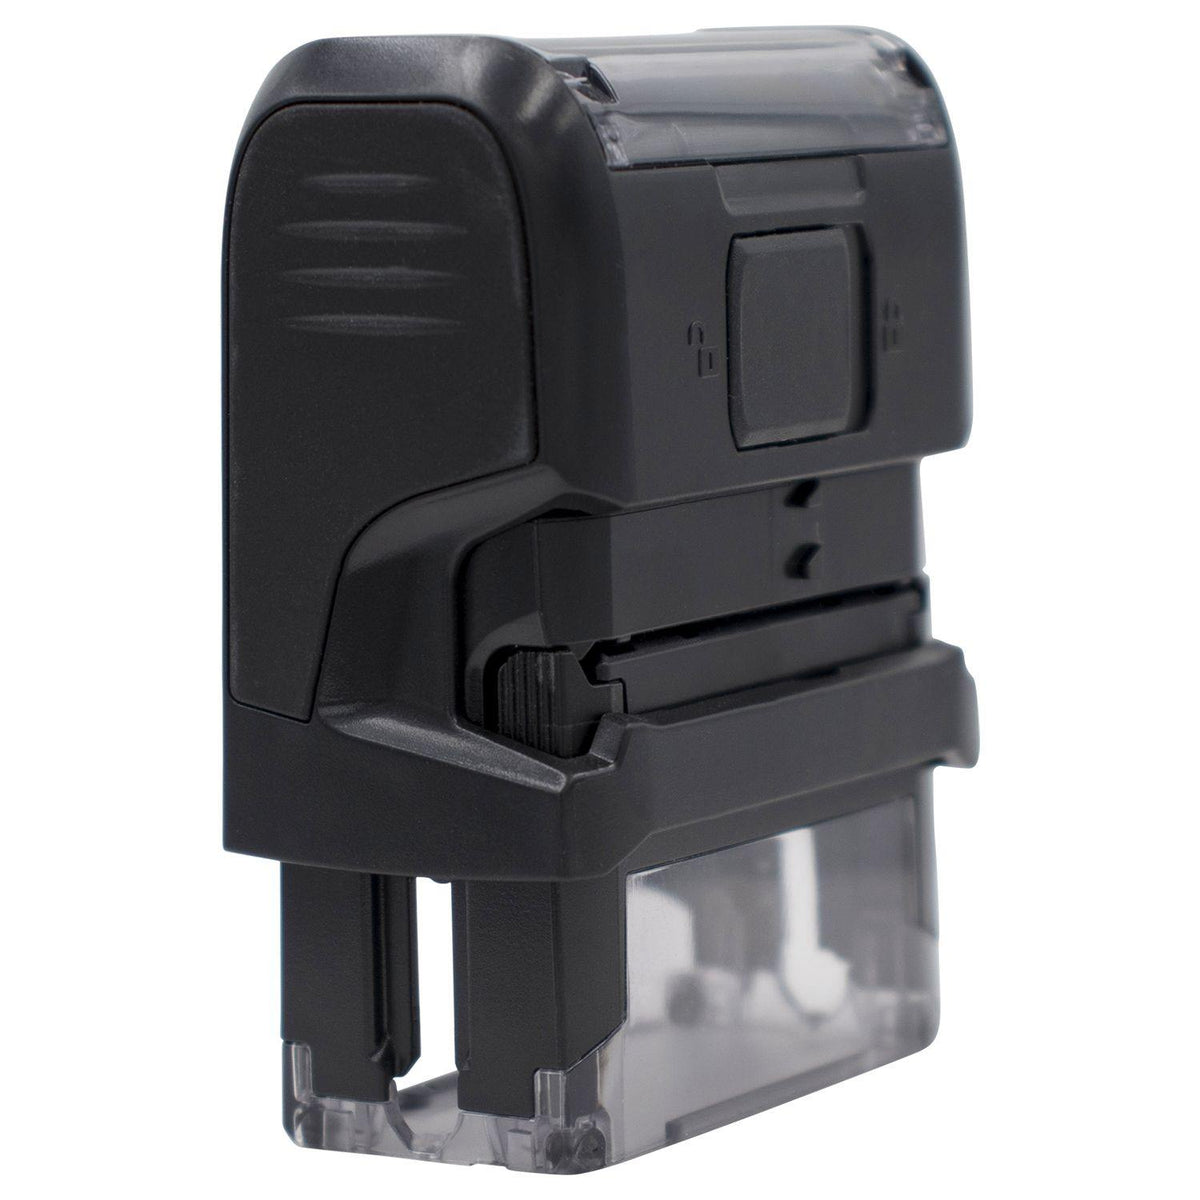 Large Self Inking Approved Stamp Back View